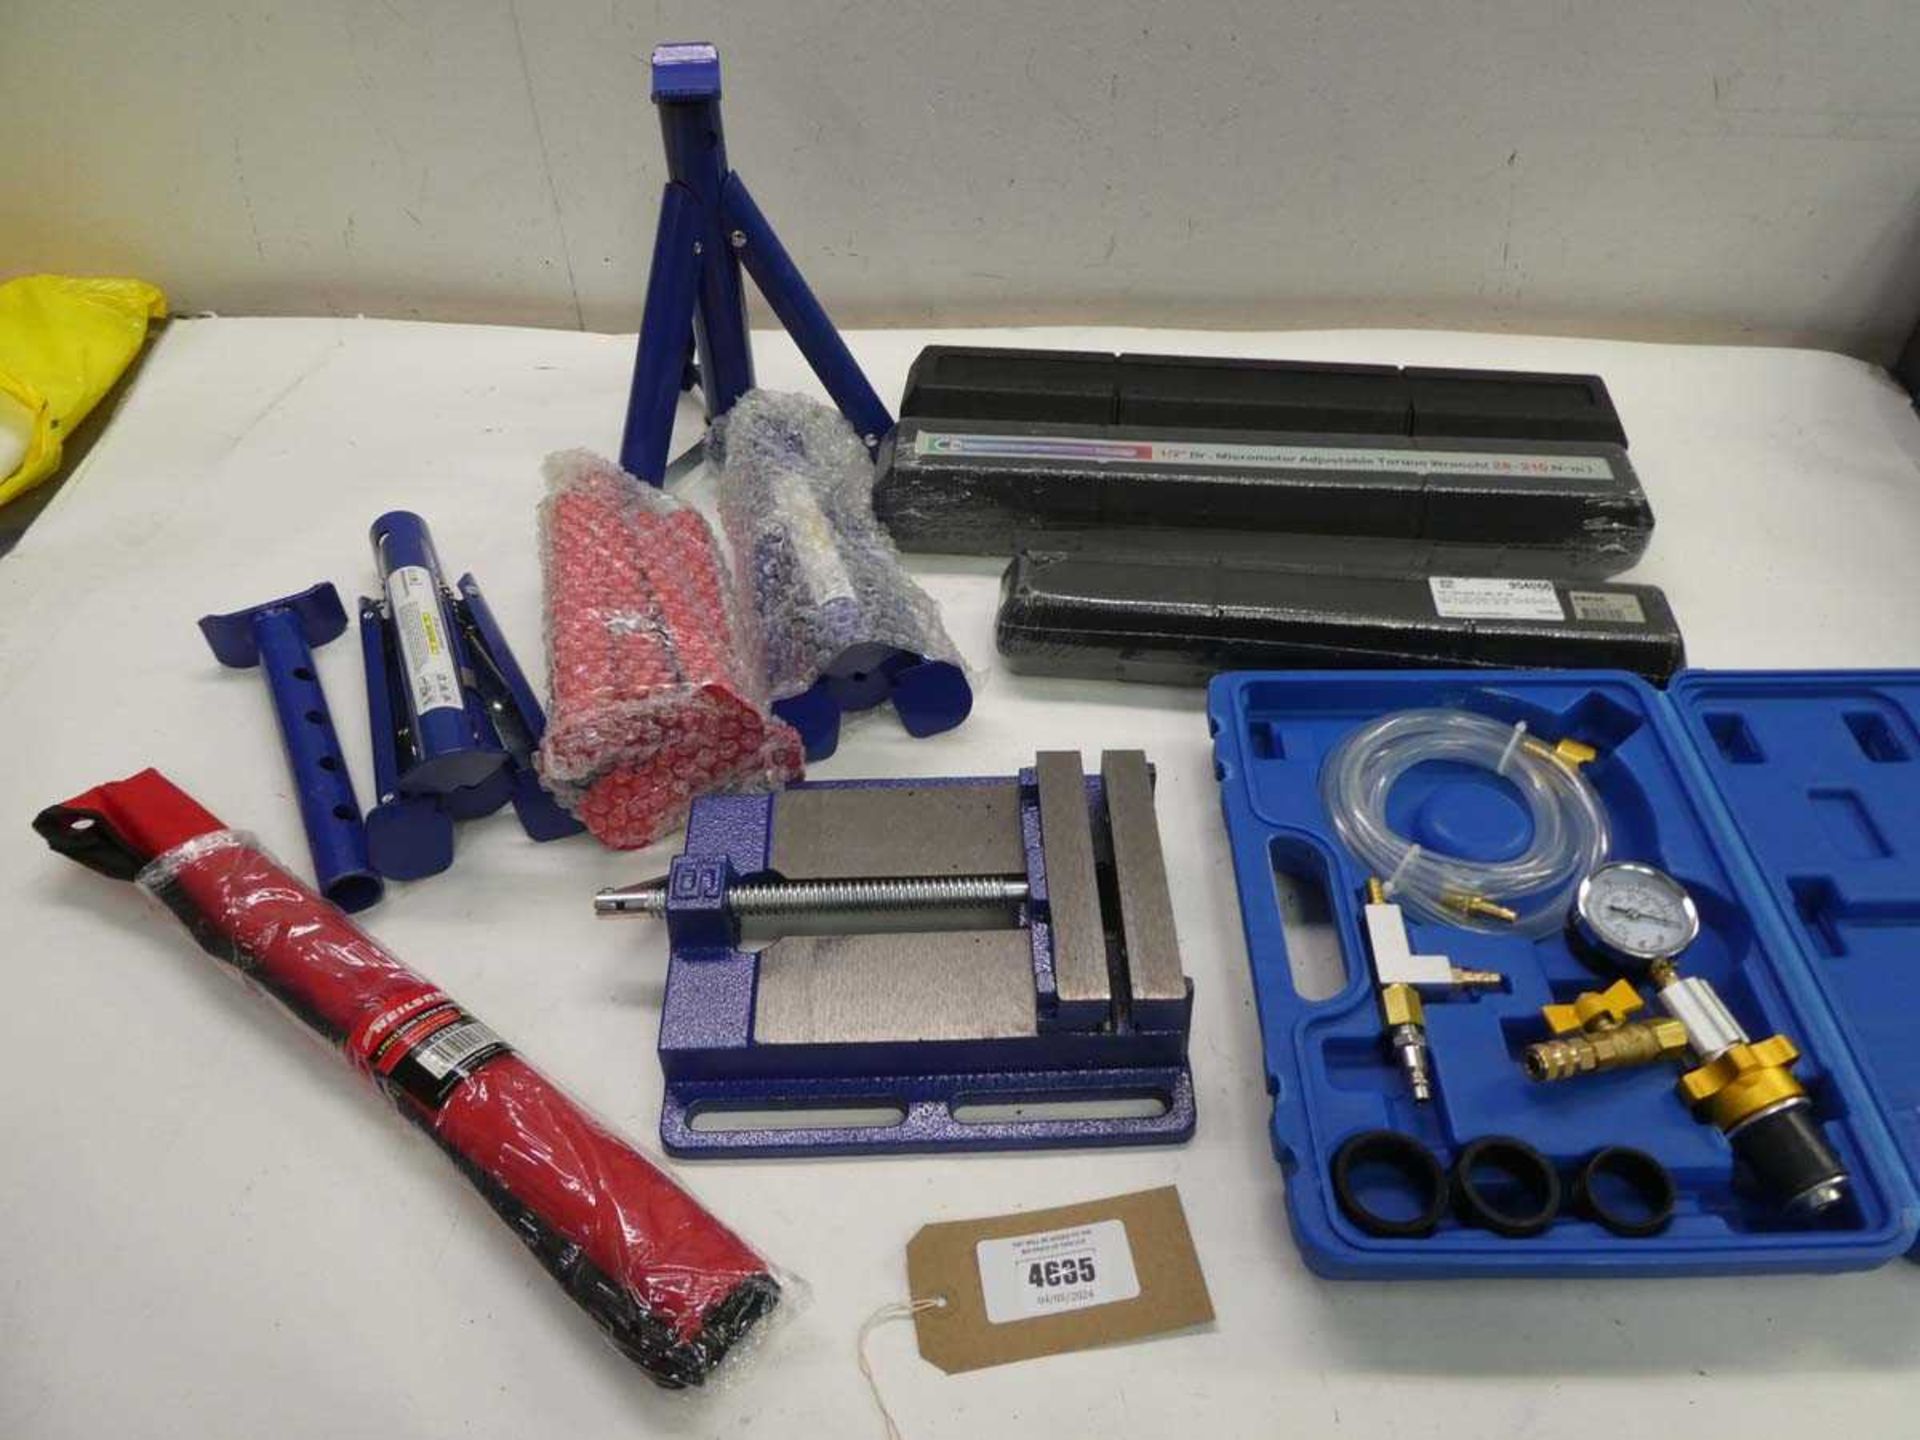 +VAT Long taper punch set, 4 axle stand, 3 torque wrenches, vice, and cooling system set